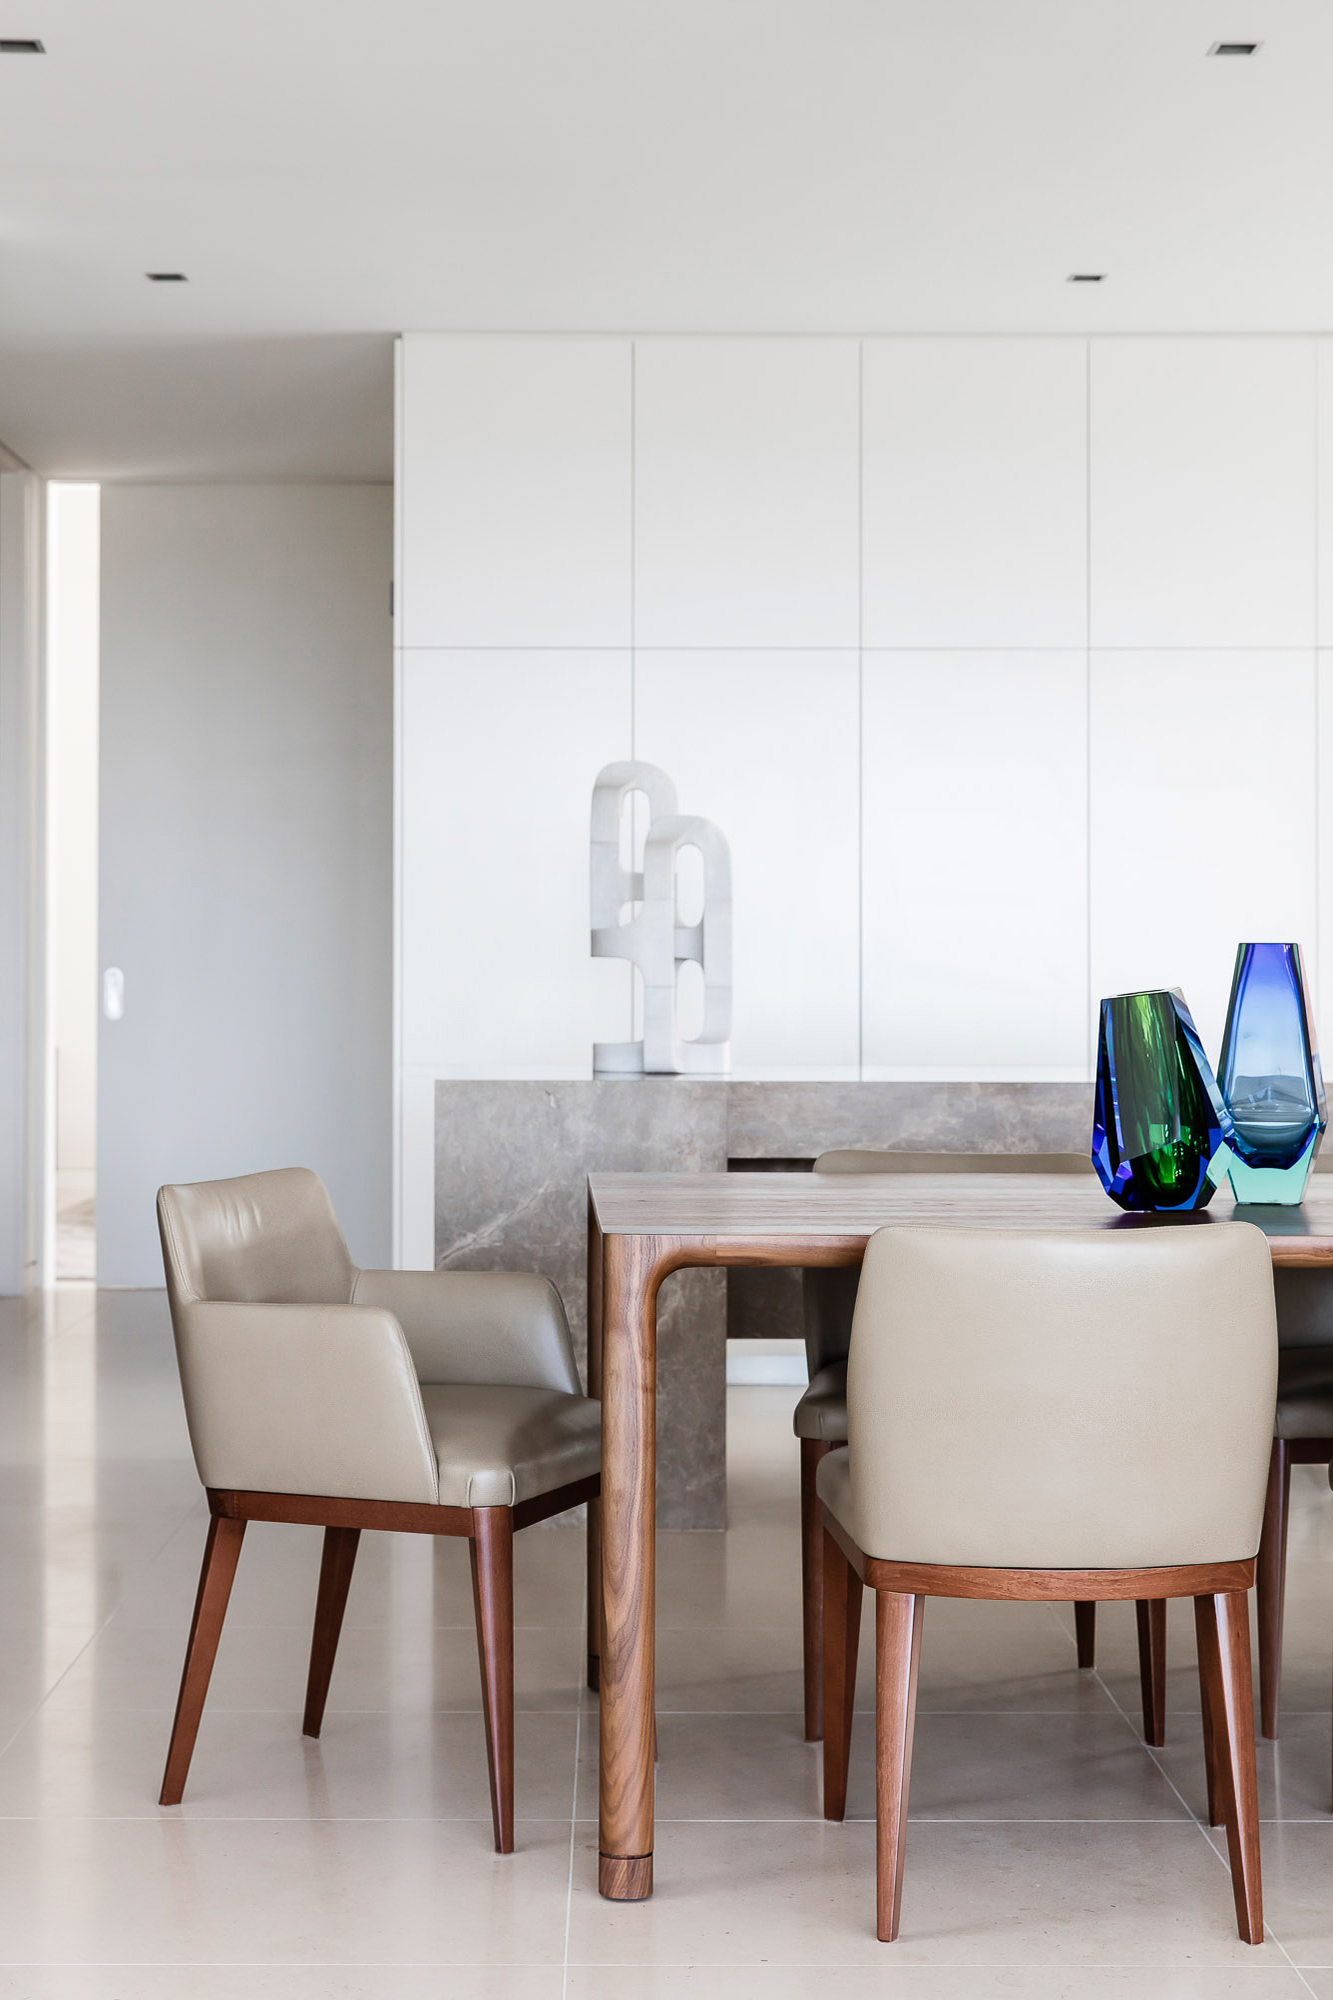 Dining room design with timber table, leather chairs and Stephen Ormandy marble sculpture, by Sydney interior designers